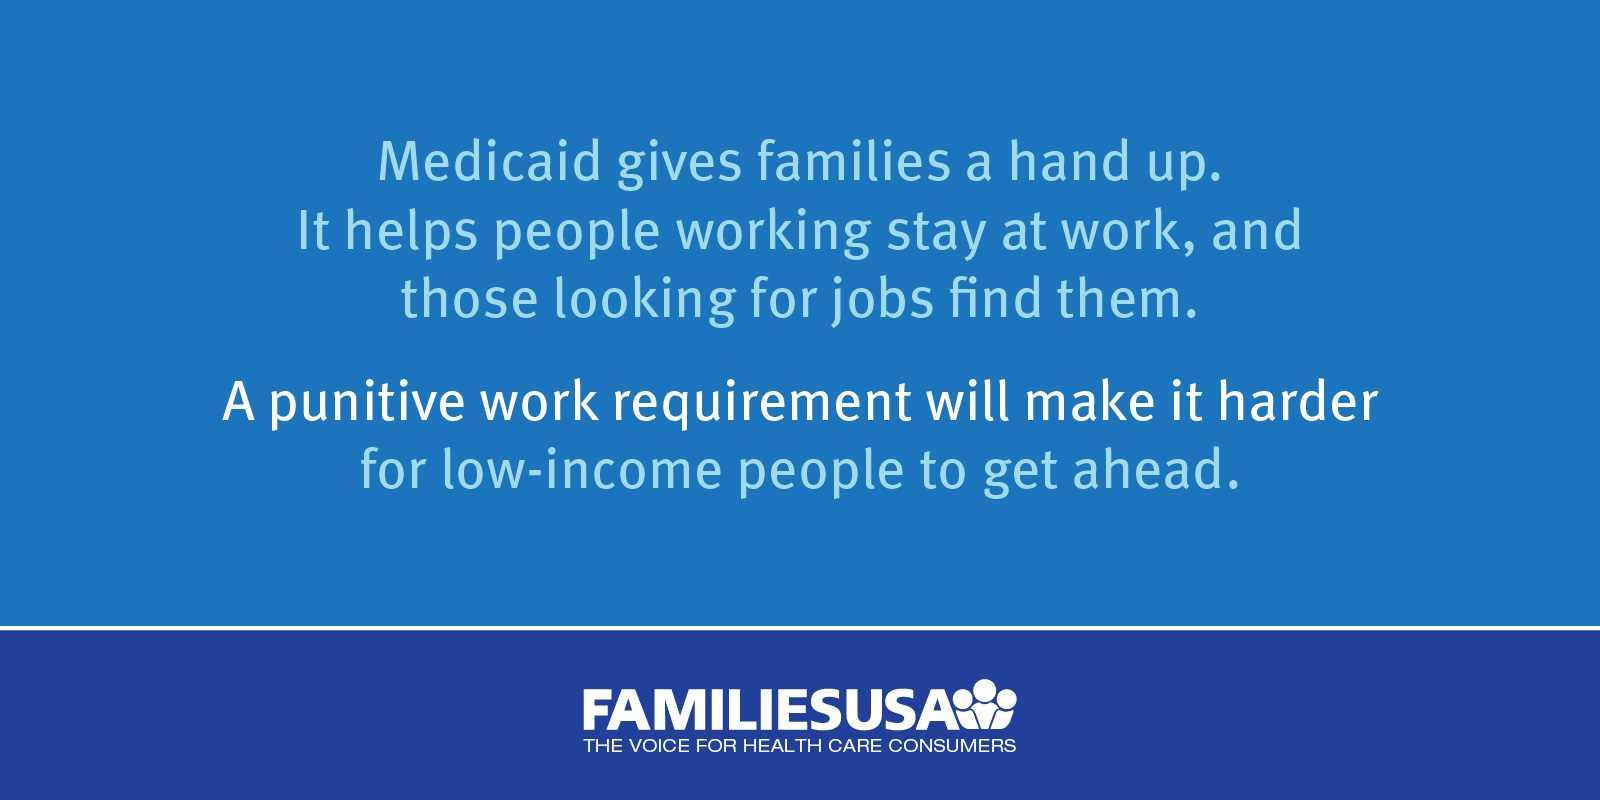 https://www.familiesusa.org/wp-content/uploads/2018/02/Medicaid_WorkRequirement.jpg